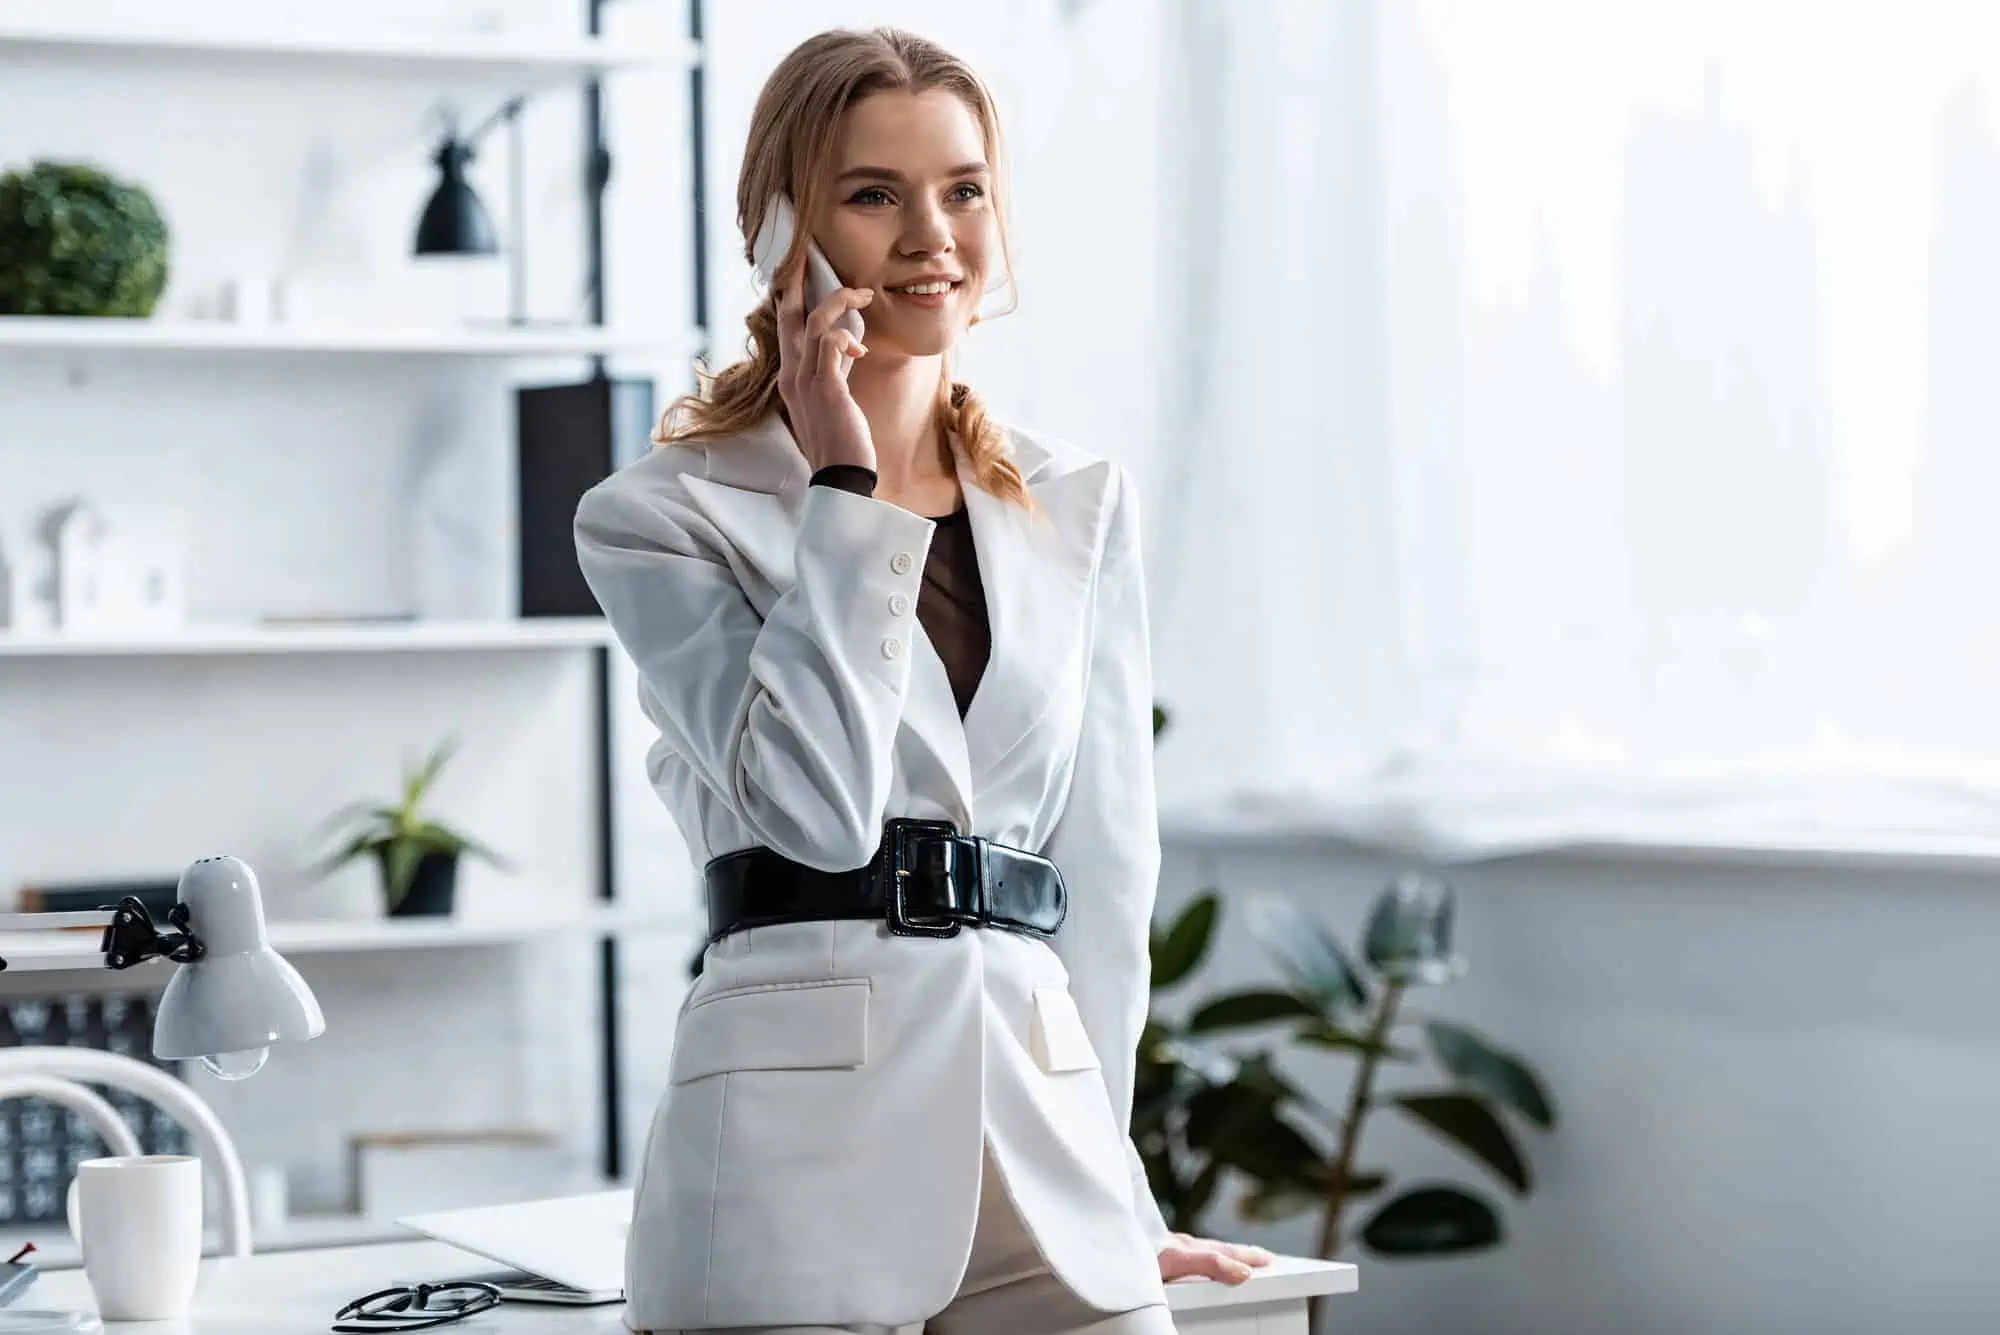 A woman in a white suit talking on a cell phone